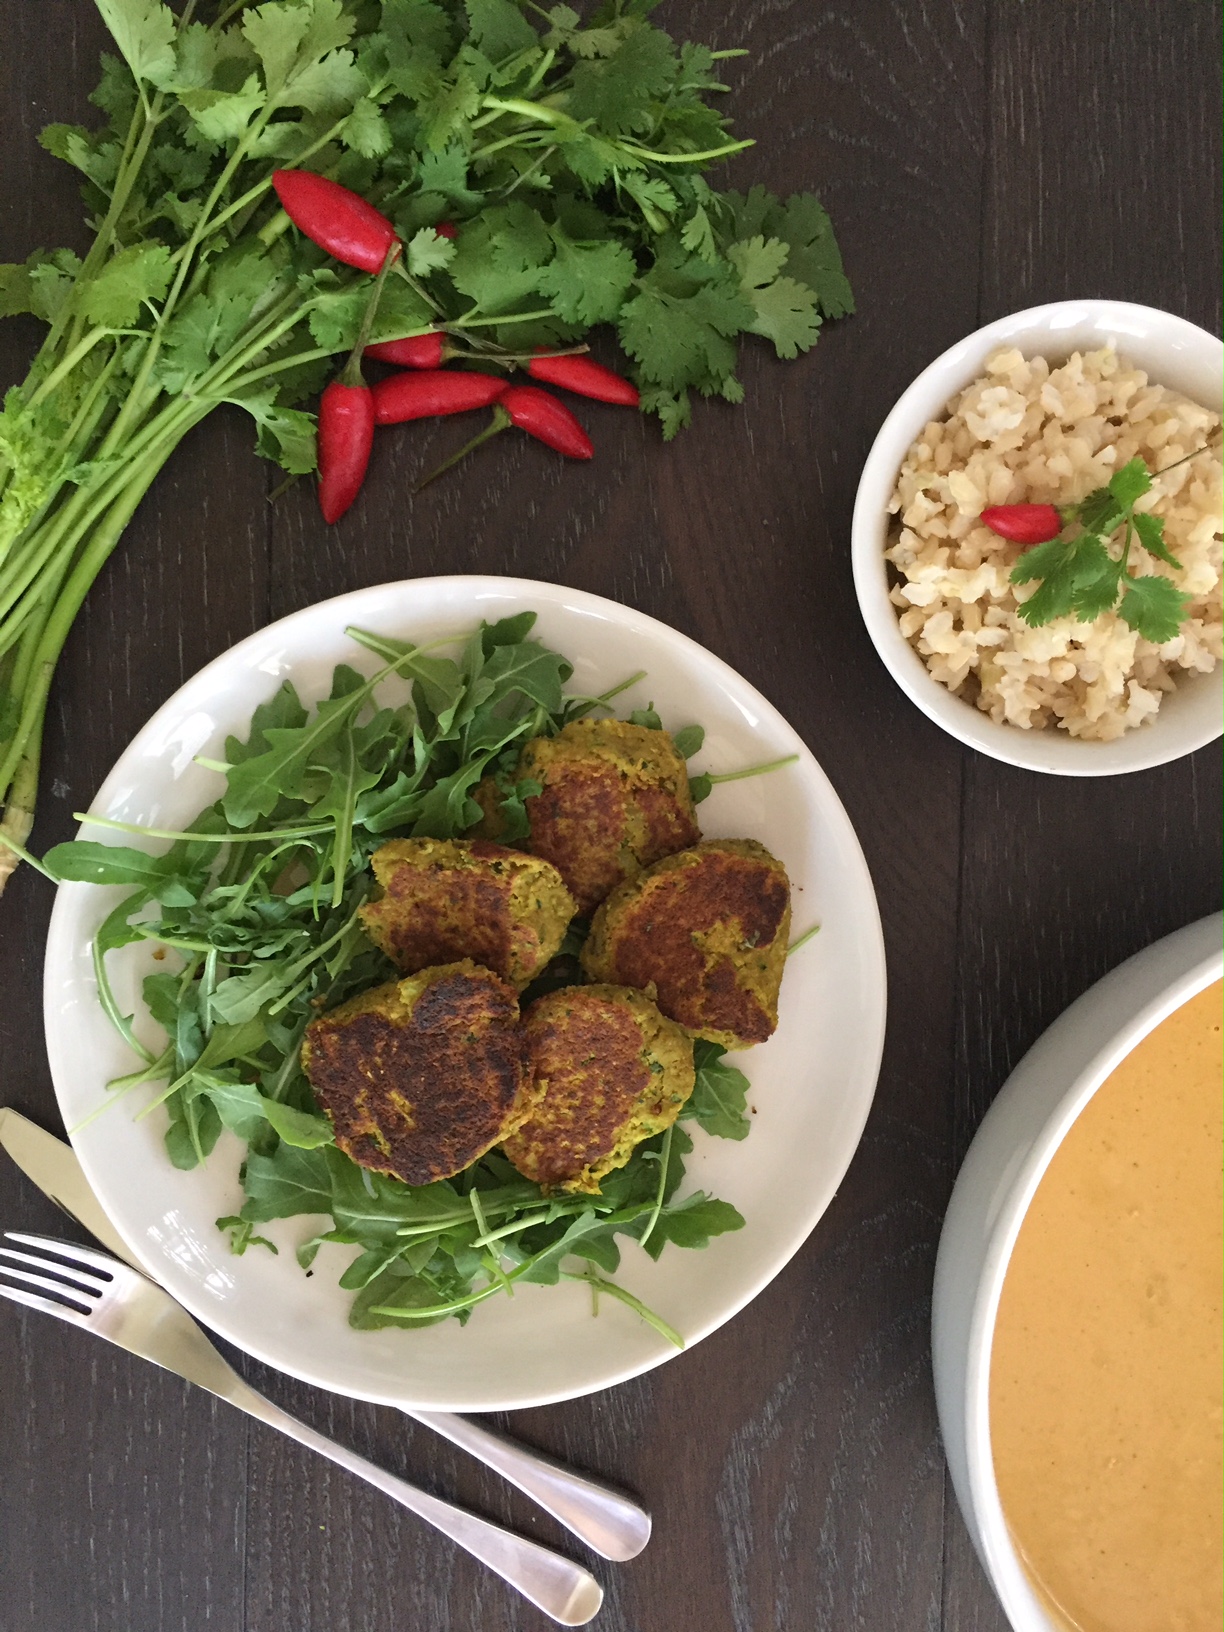 Thermomix Chilli-chickpea + Sunflower ‘Meatballs’ w. Golden Cashew Curry Sauce